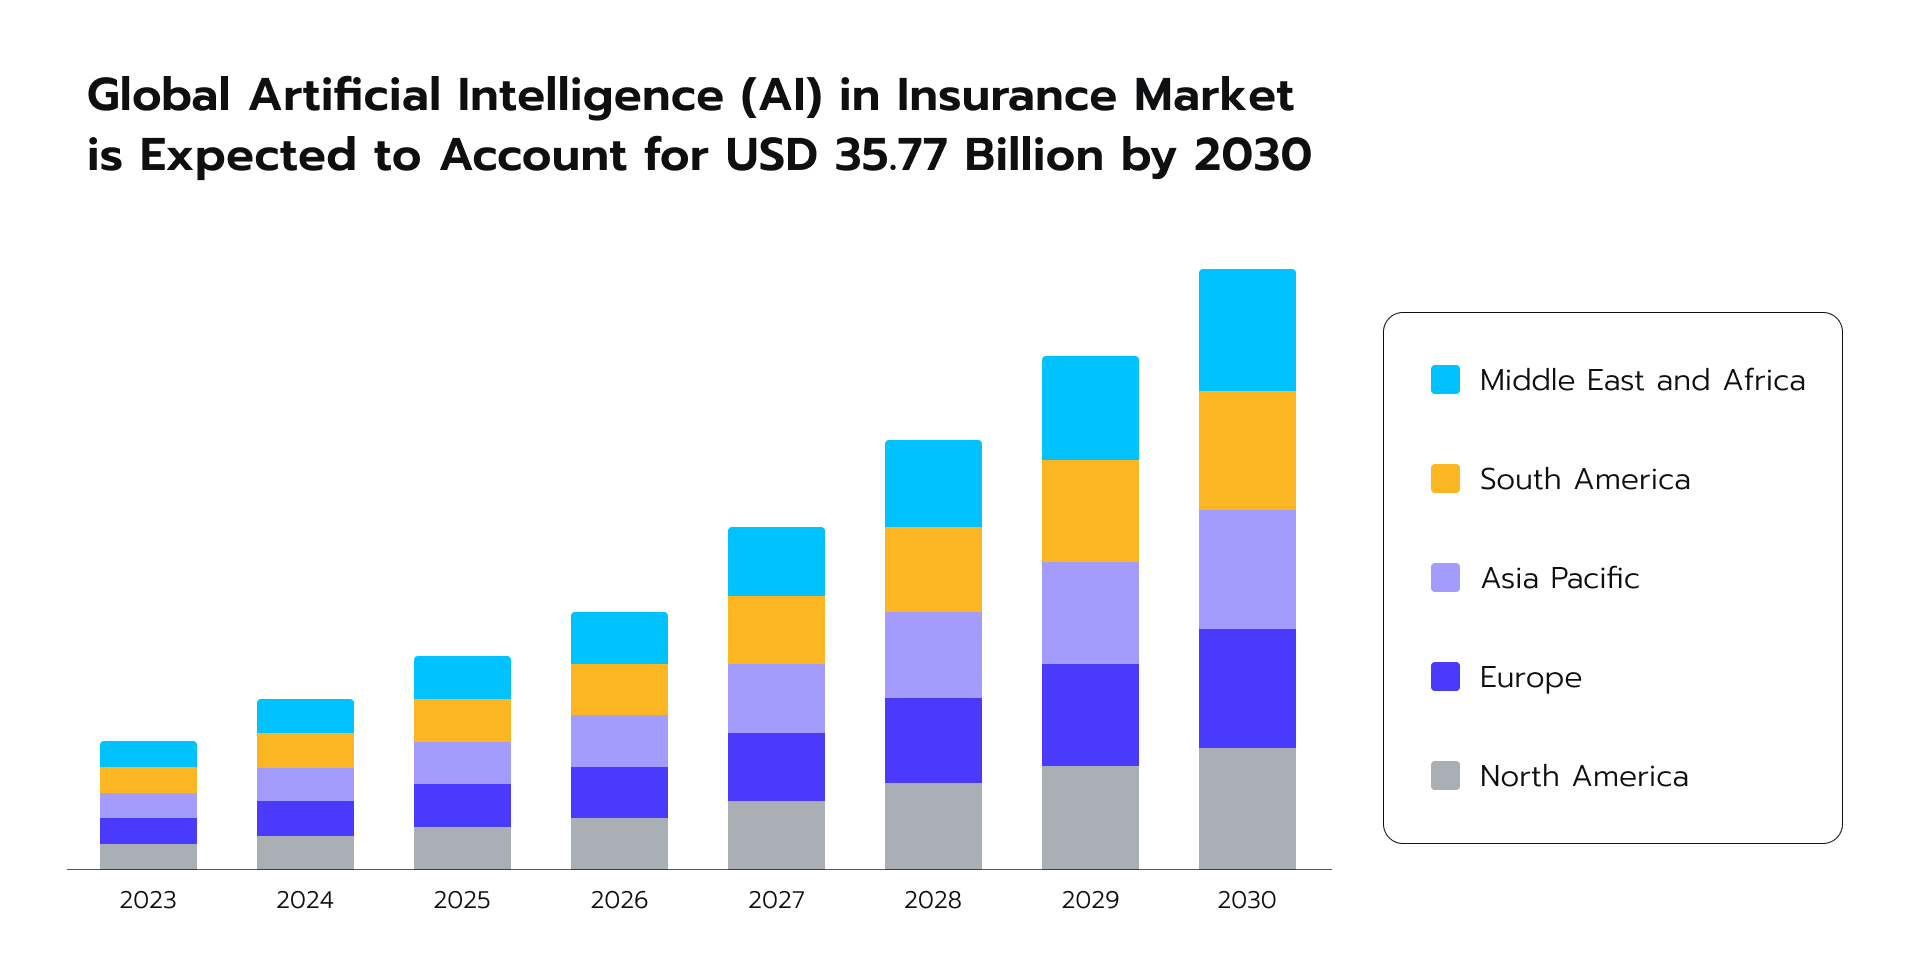 Expected global AI market growth from 2023 to 2030